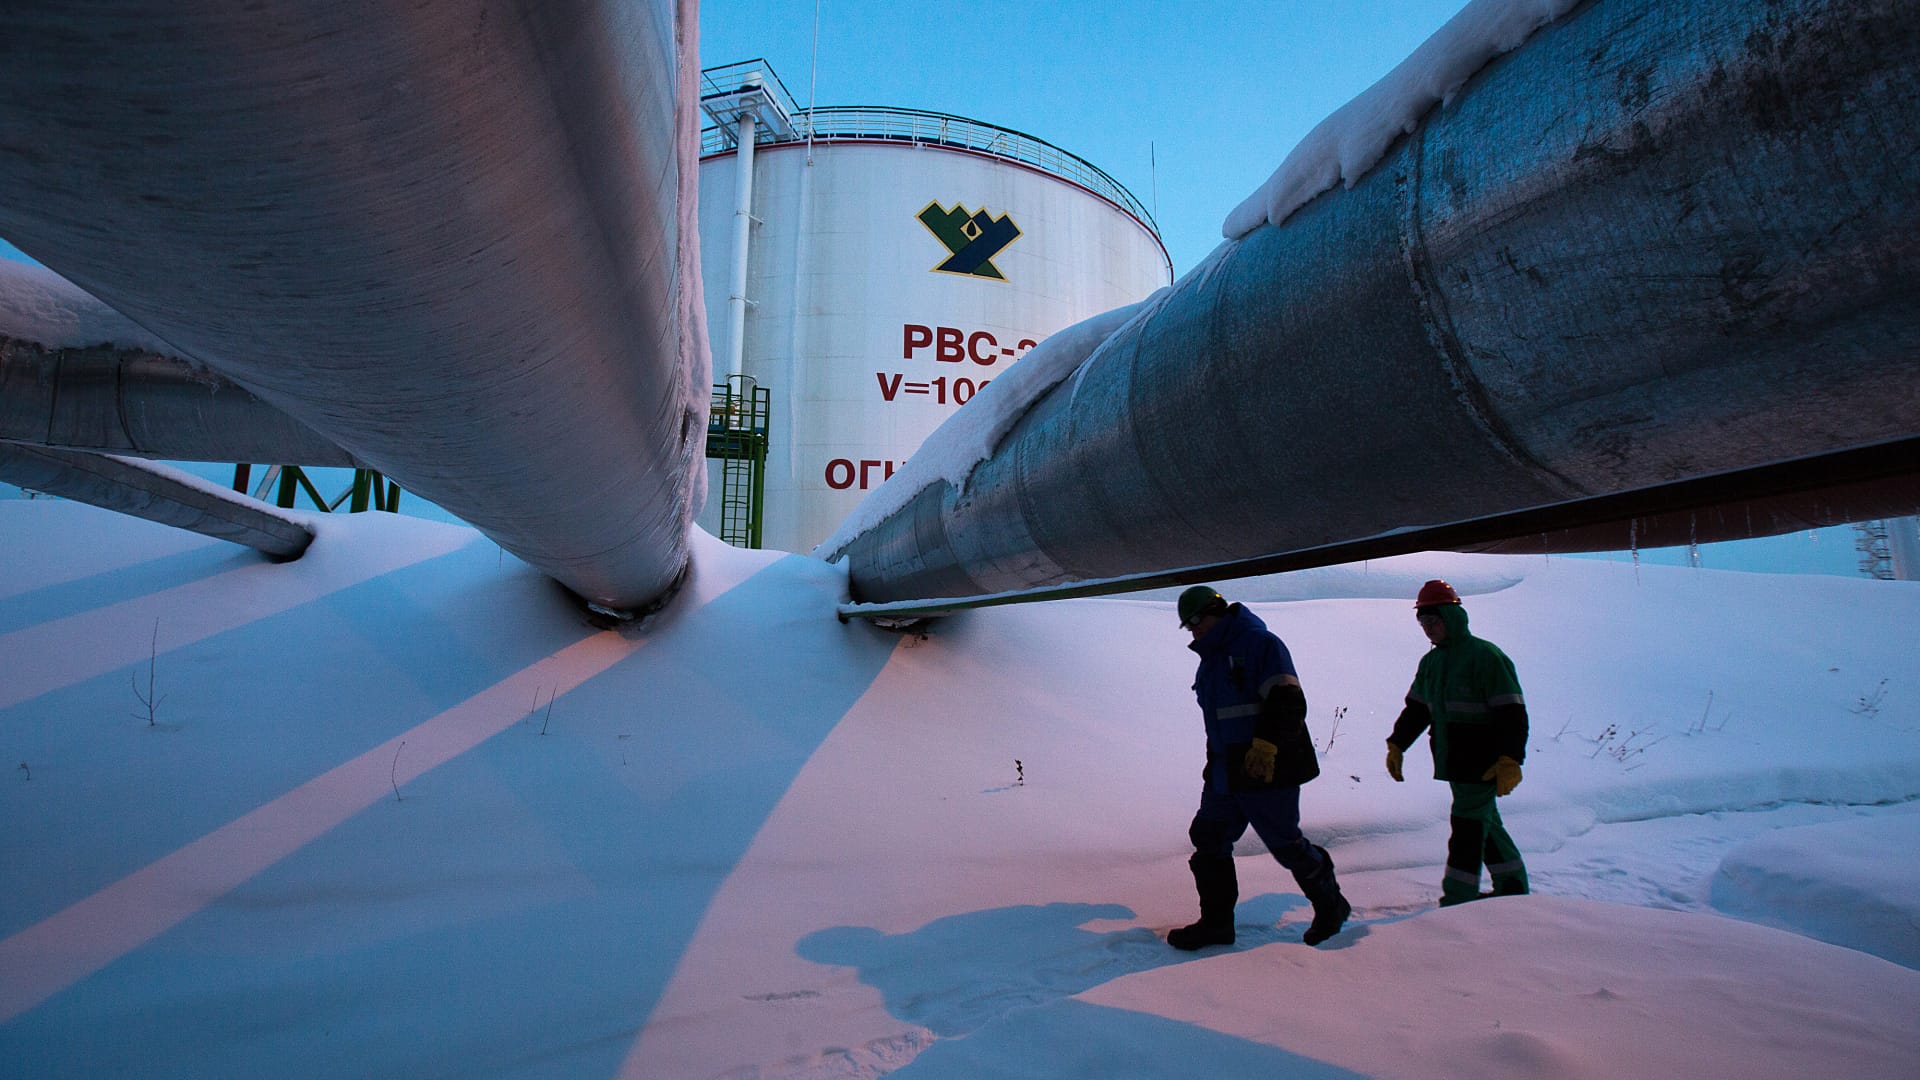 Russia’s halt of European gas could see ‘catastrophic’ winter pricing veteran trader warns – CNBC